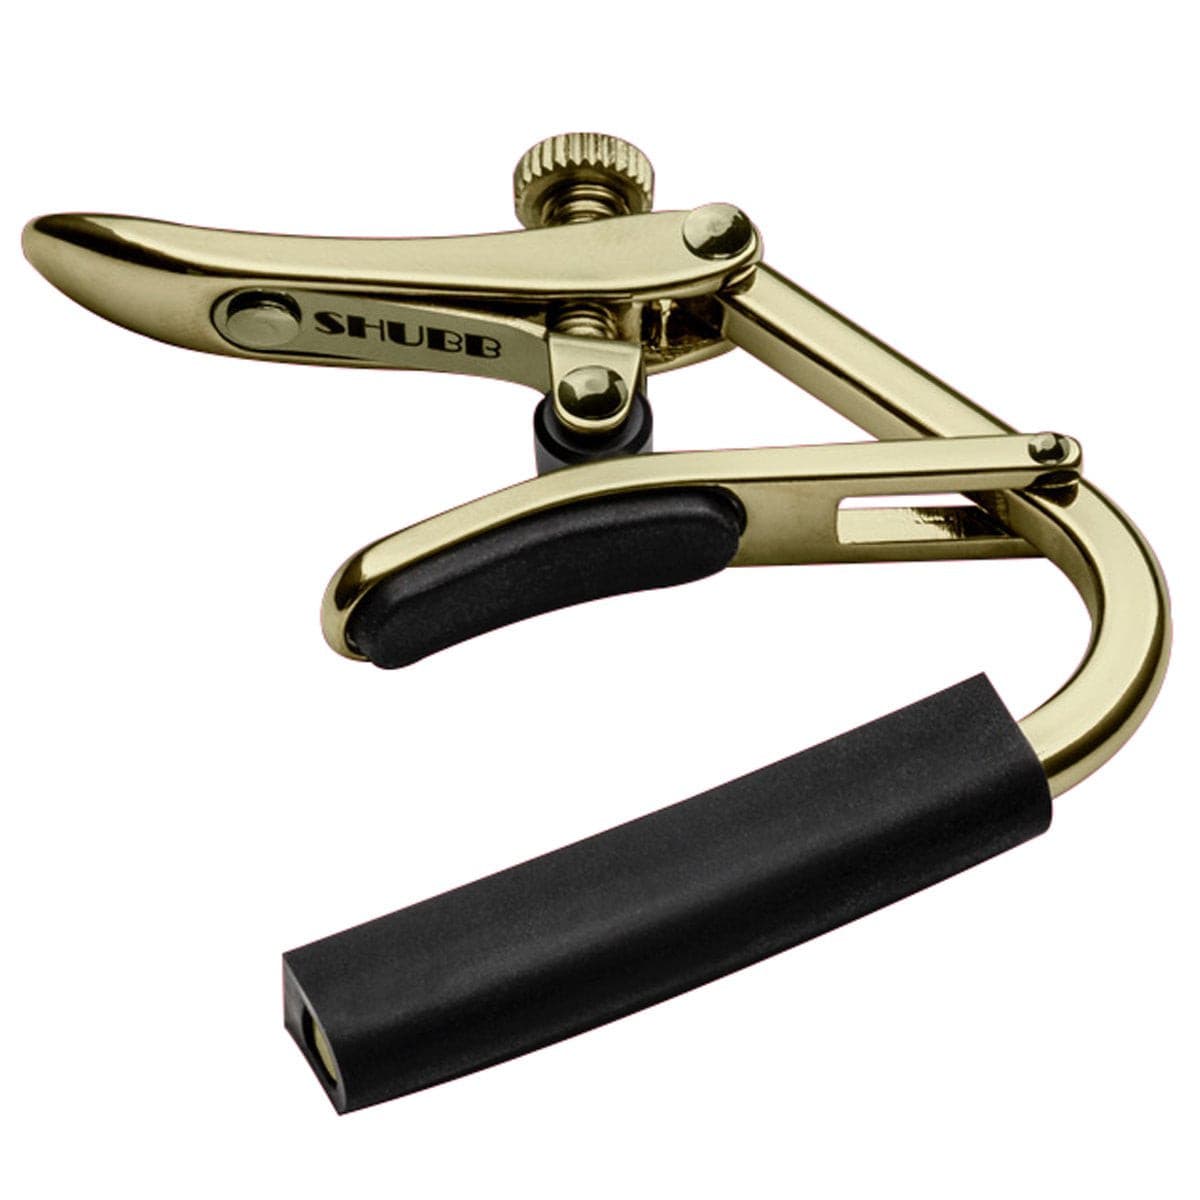 Shubb 'Capo Royale' Nylon String Guitar Capo - Gold, Accessory for sale at Richards Guitars.